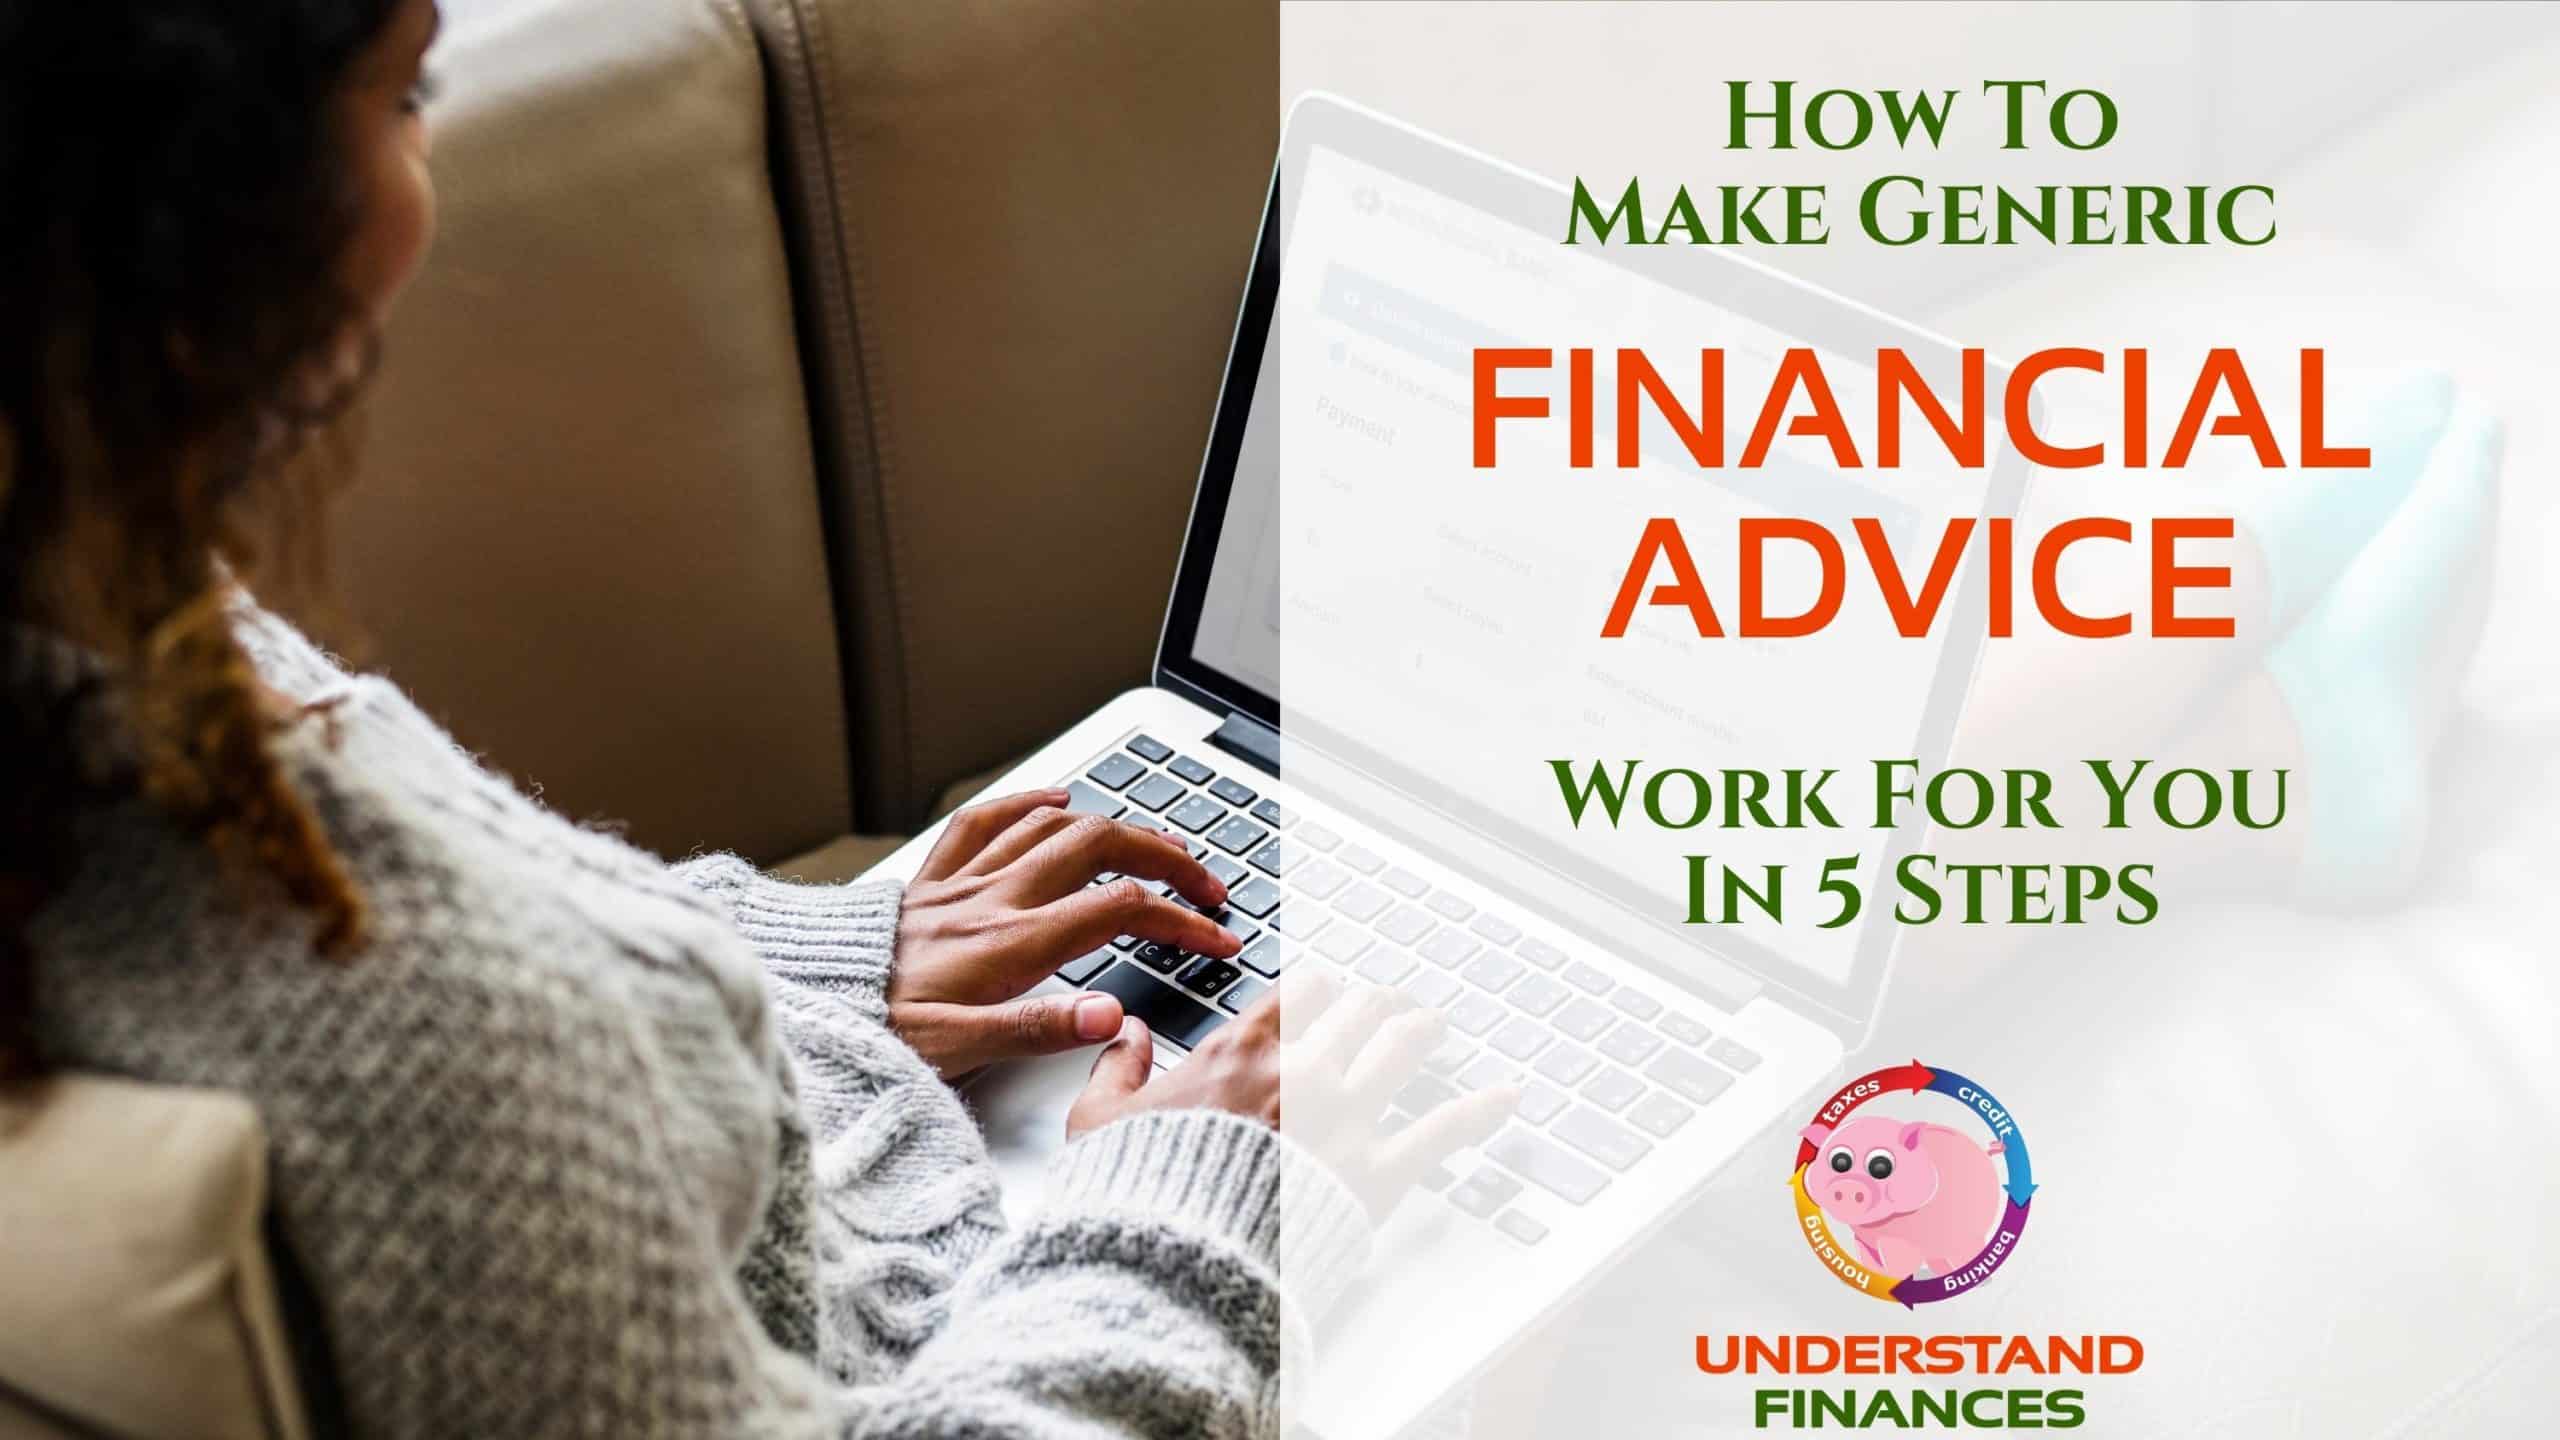 How To Make Generic Financial Advice Work For You In 5 Steps